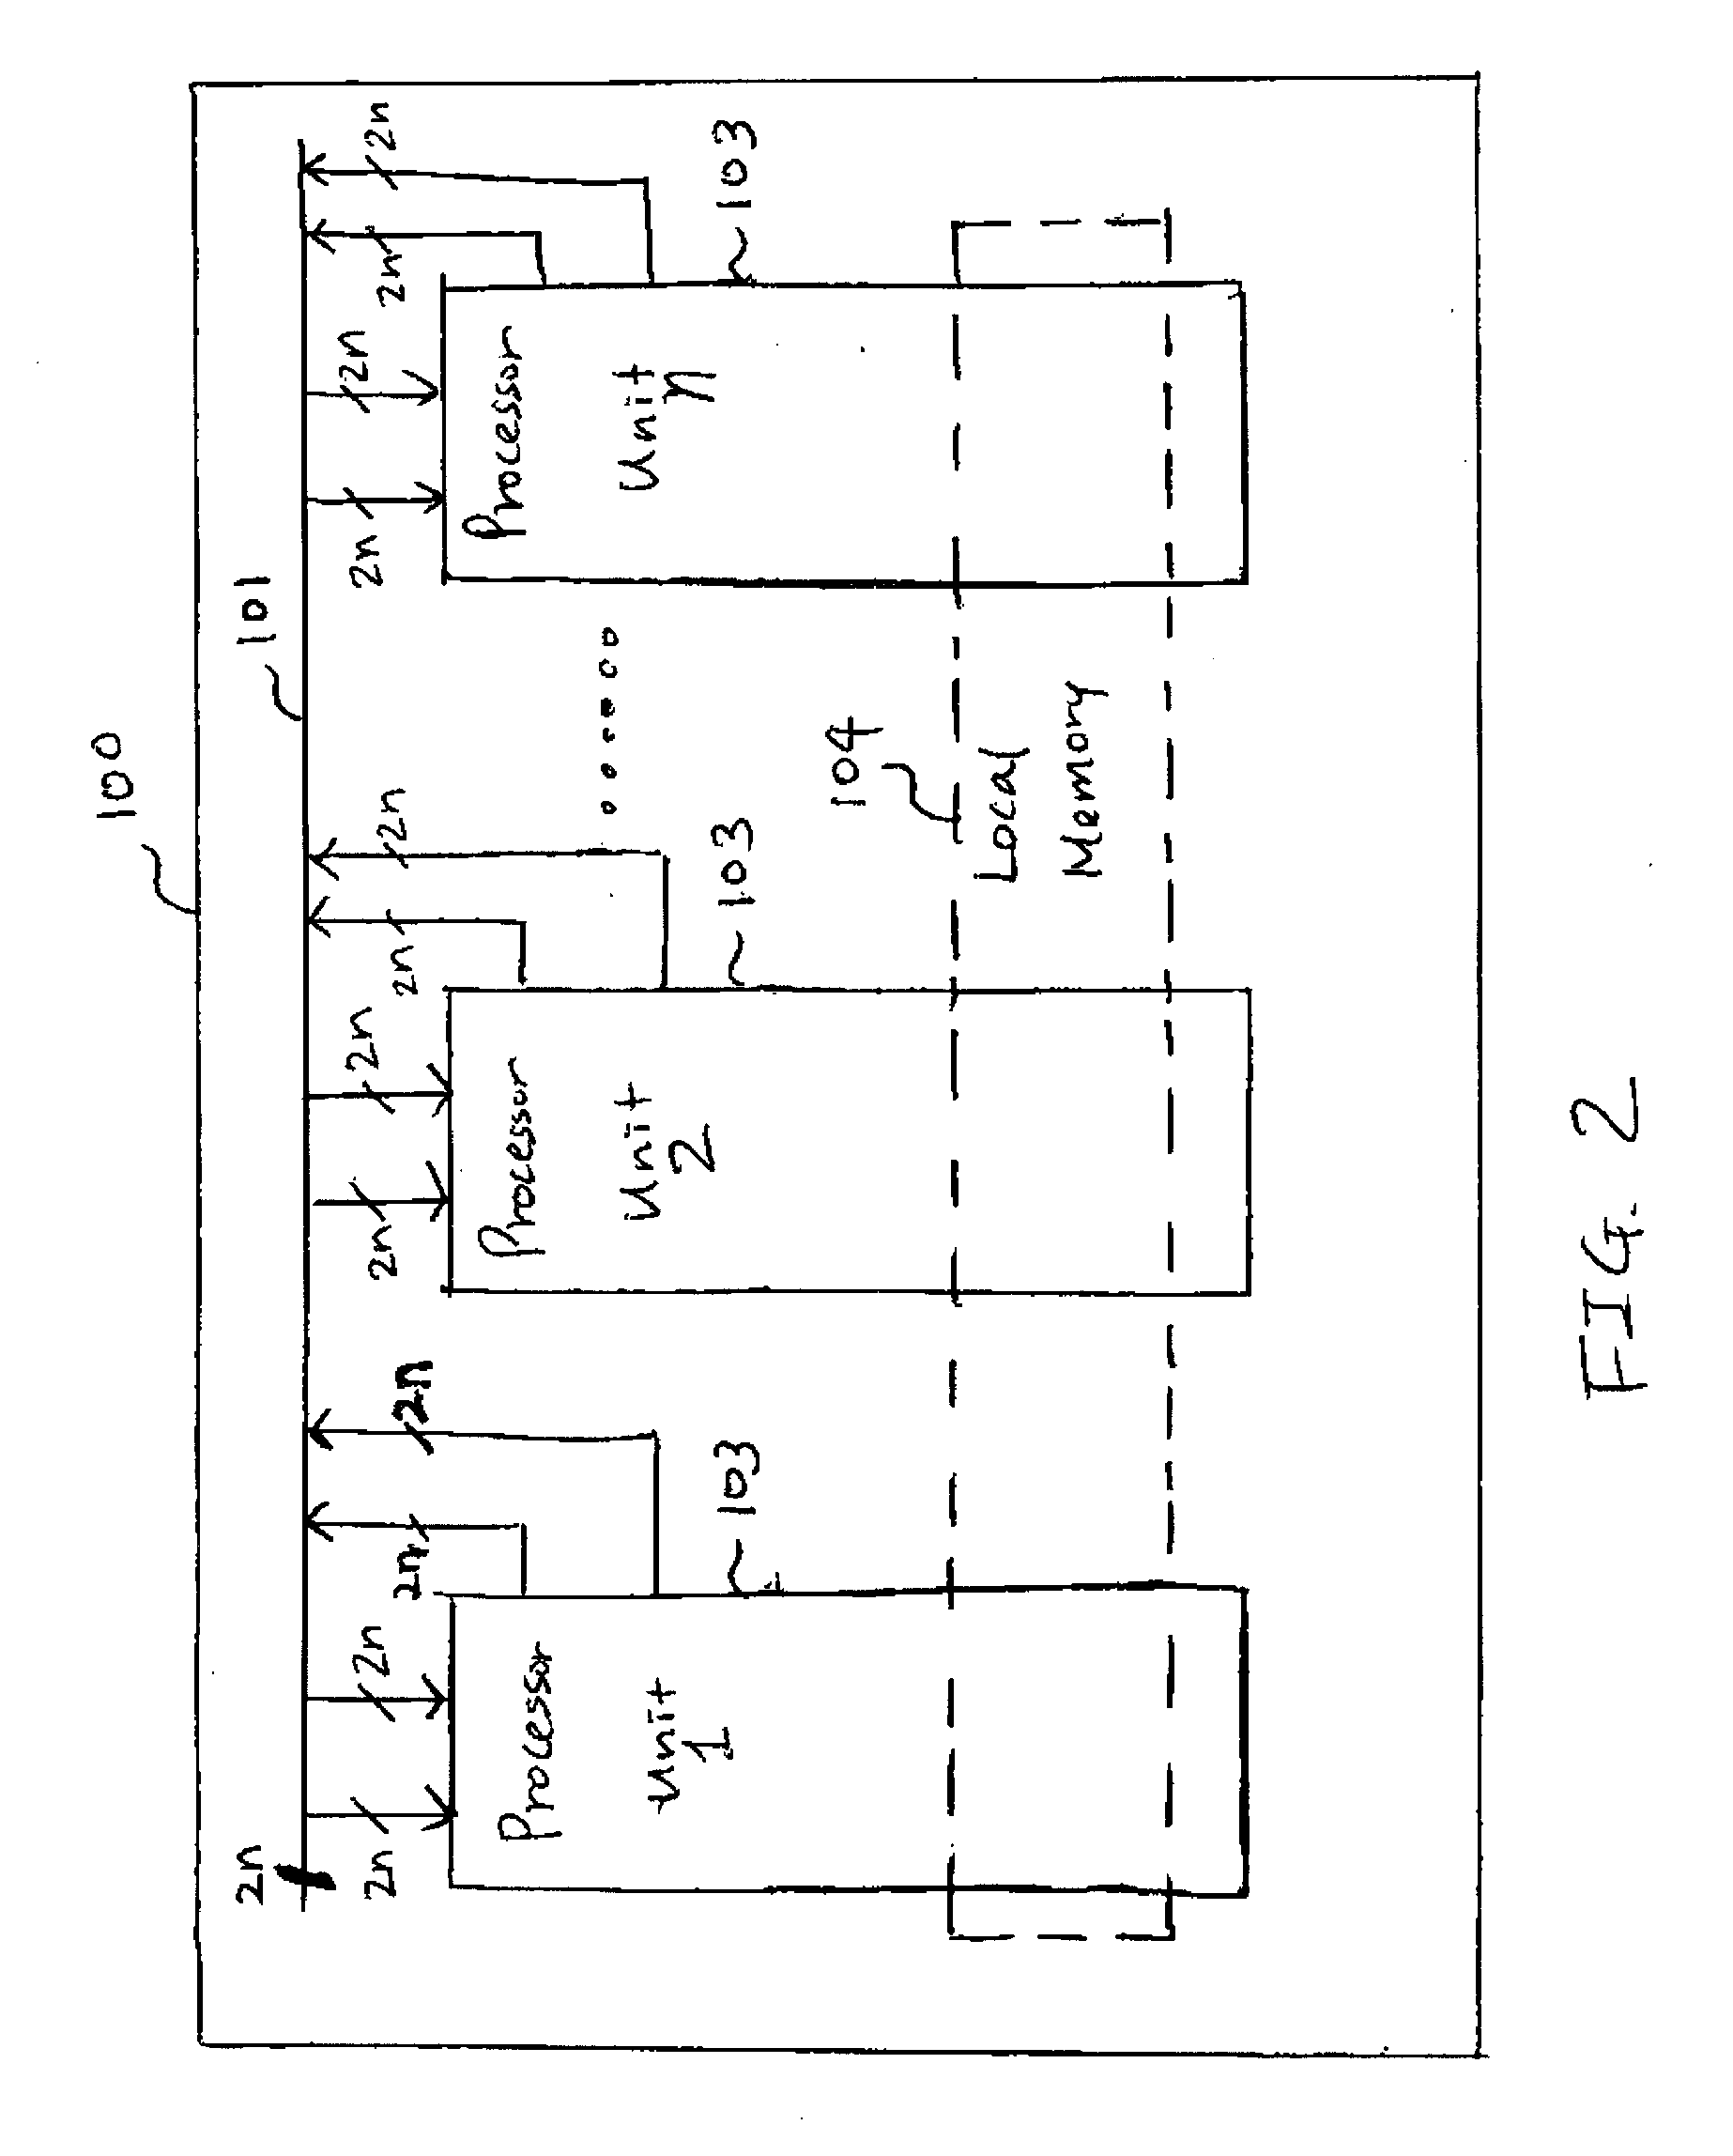 VLIW Acceleration System Using Multi-state Logic